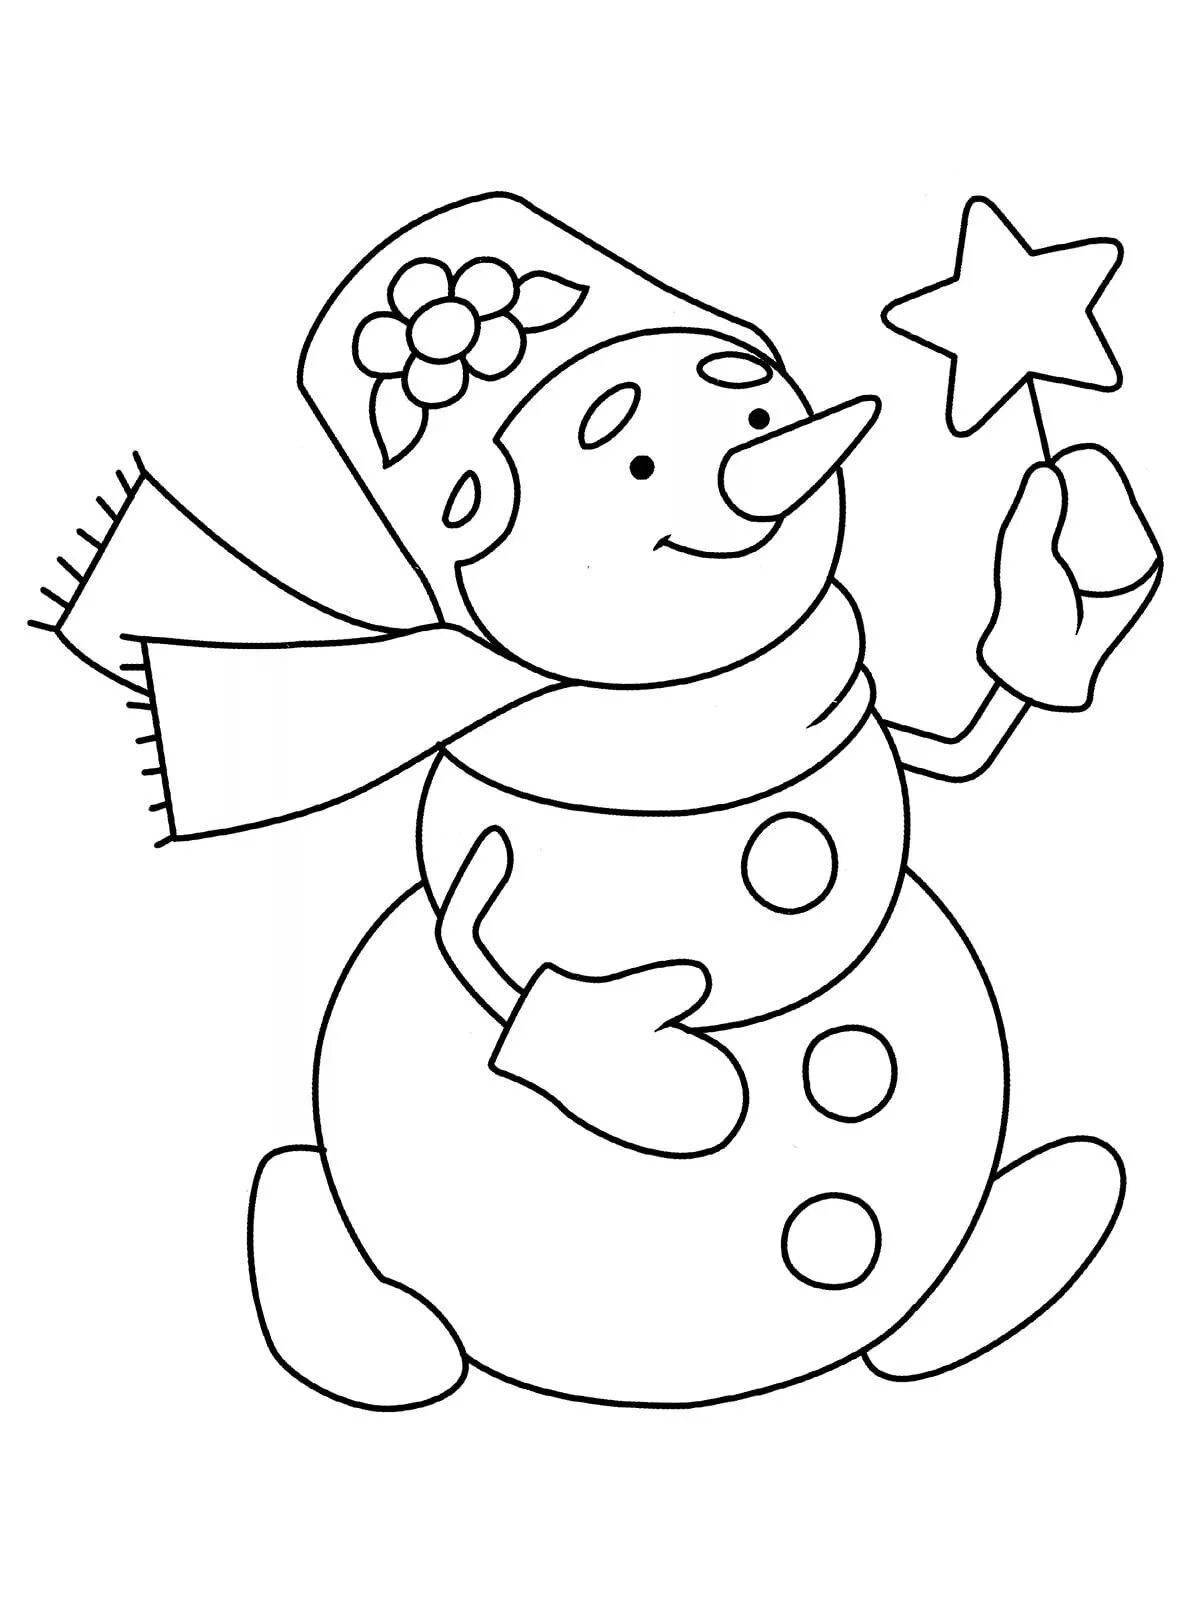 A fascinating snowman coloring book for children 6-7 years old